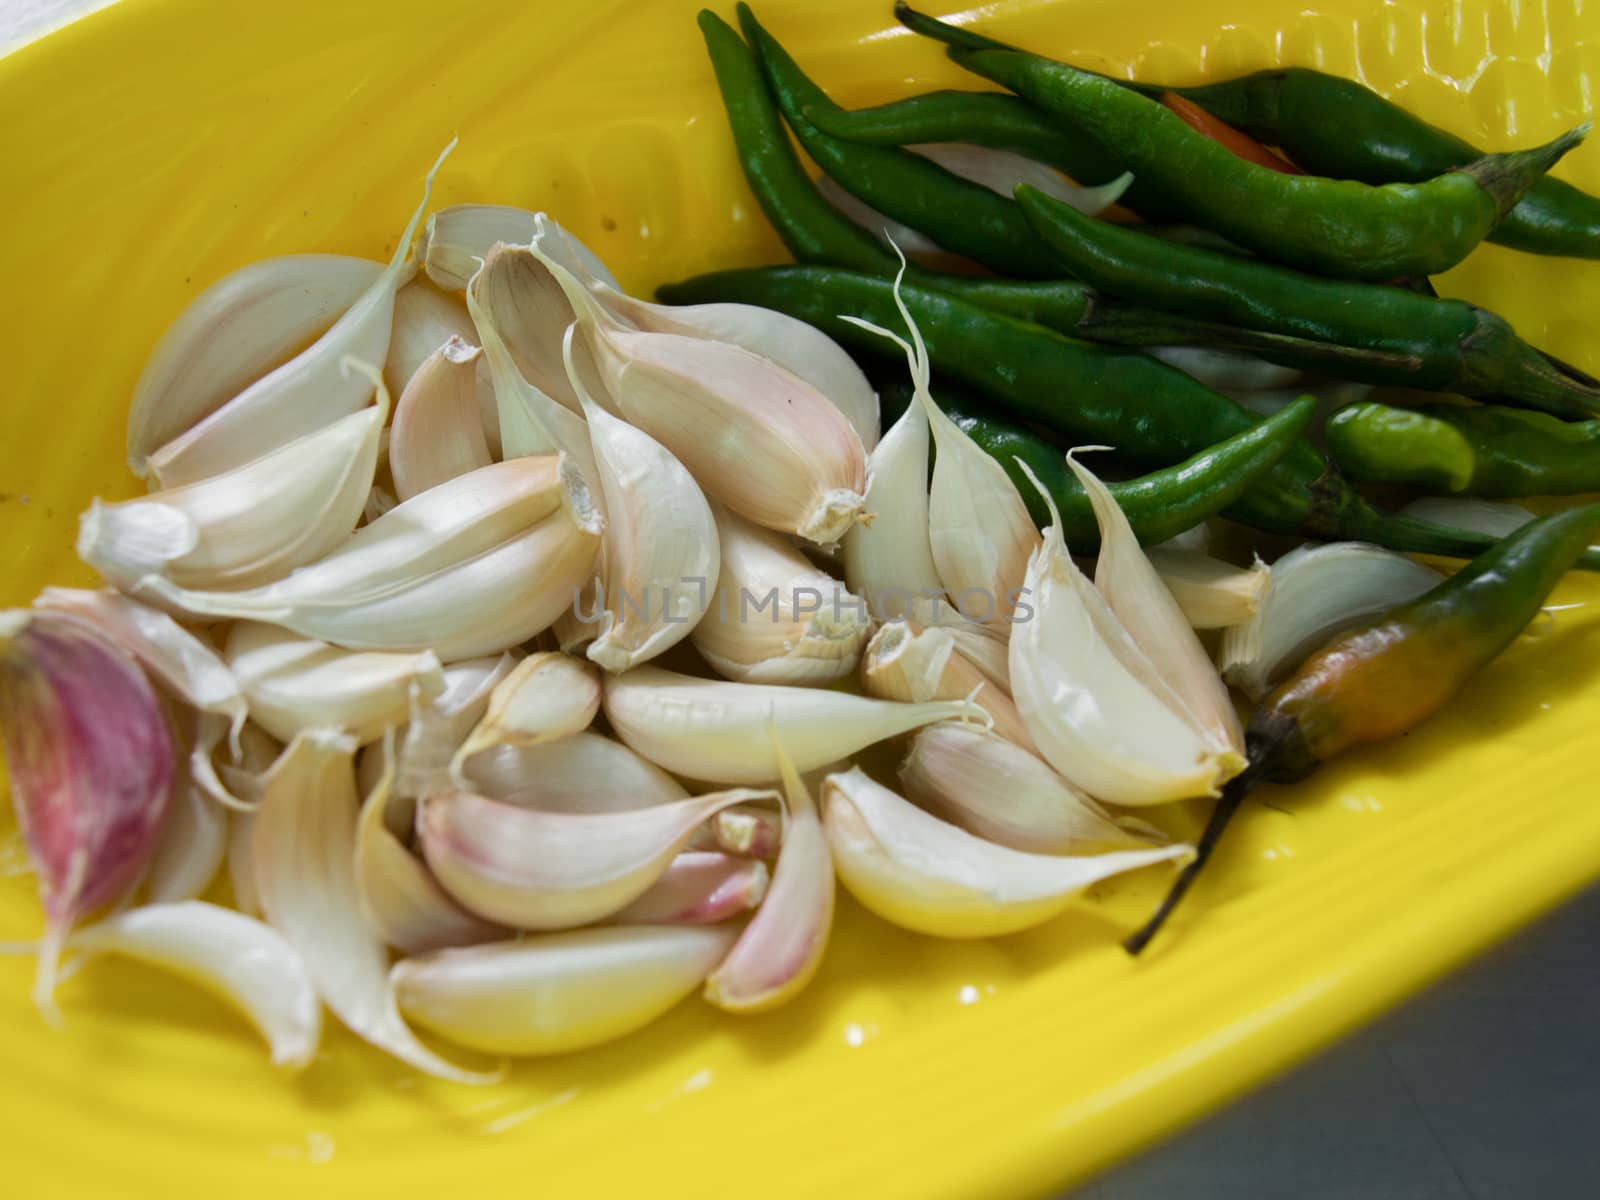 COLOR PHOTO OF CLOSE-UP SHOT OF RAW GARLIC AND GREEN CHILLI PEPPERS ON PLATE